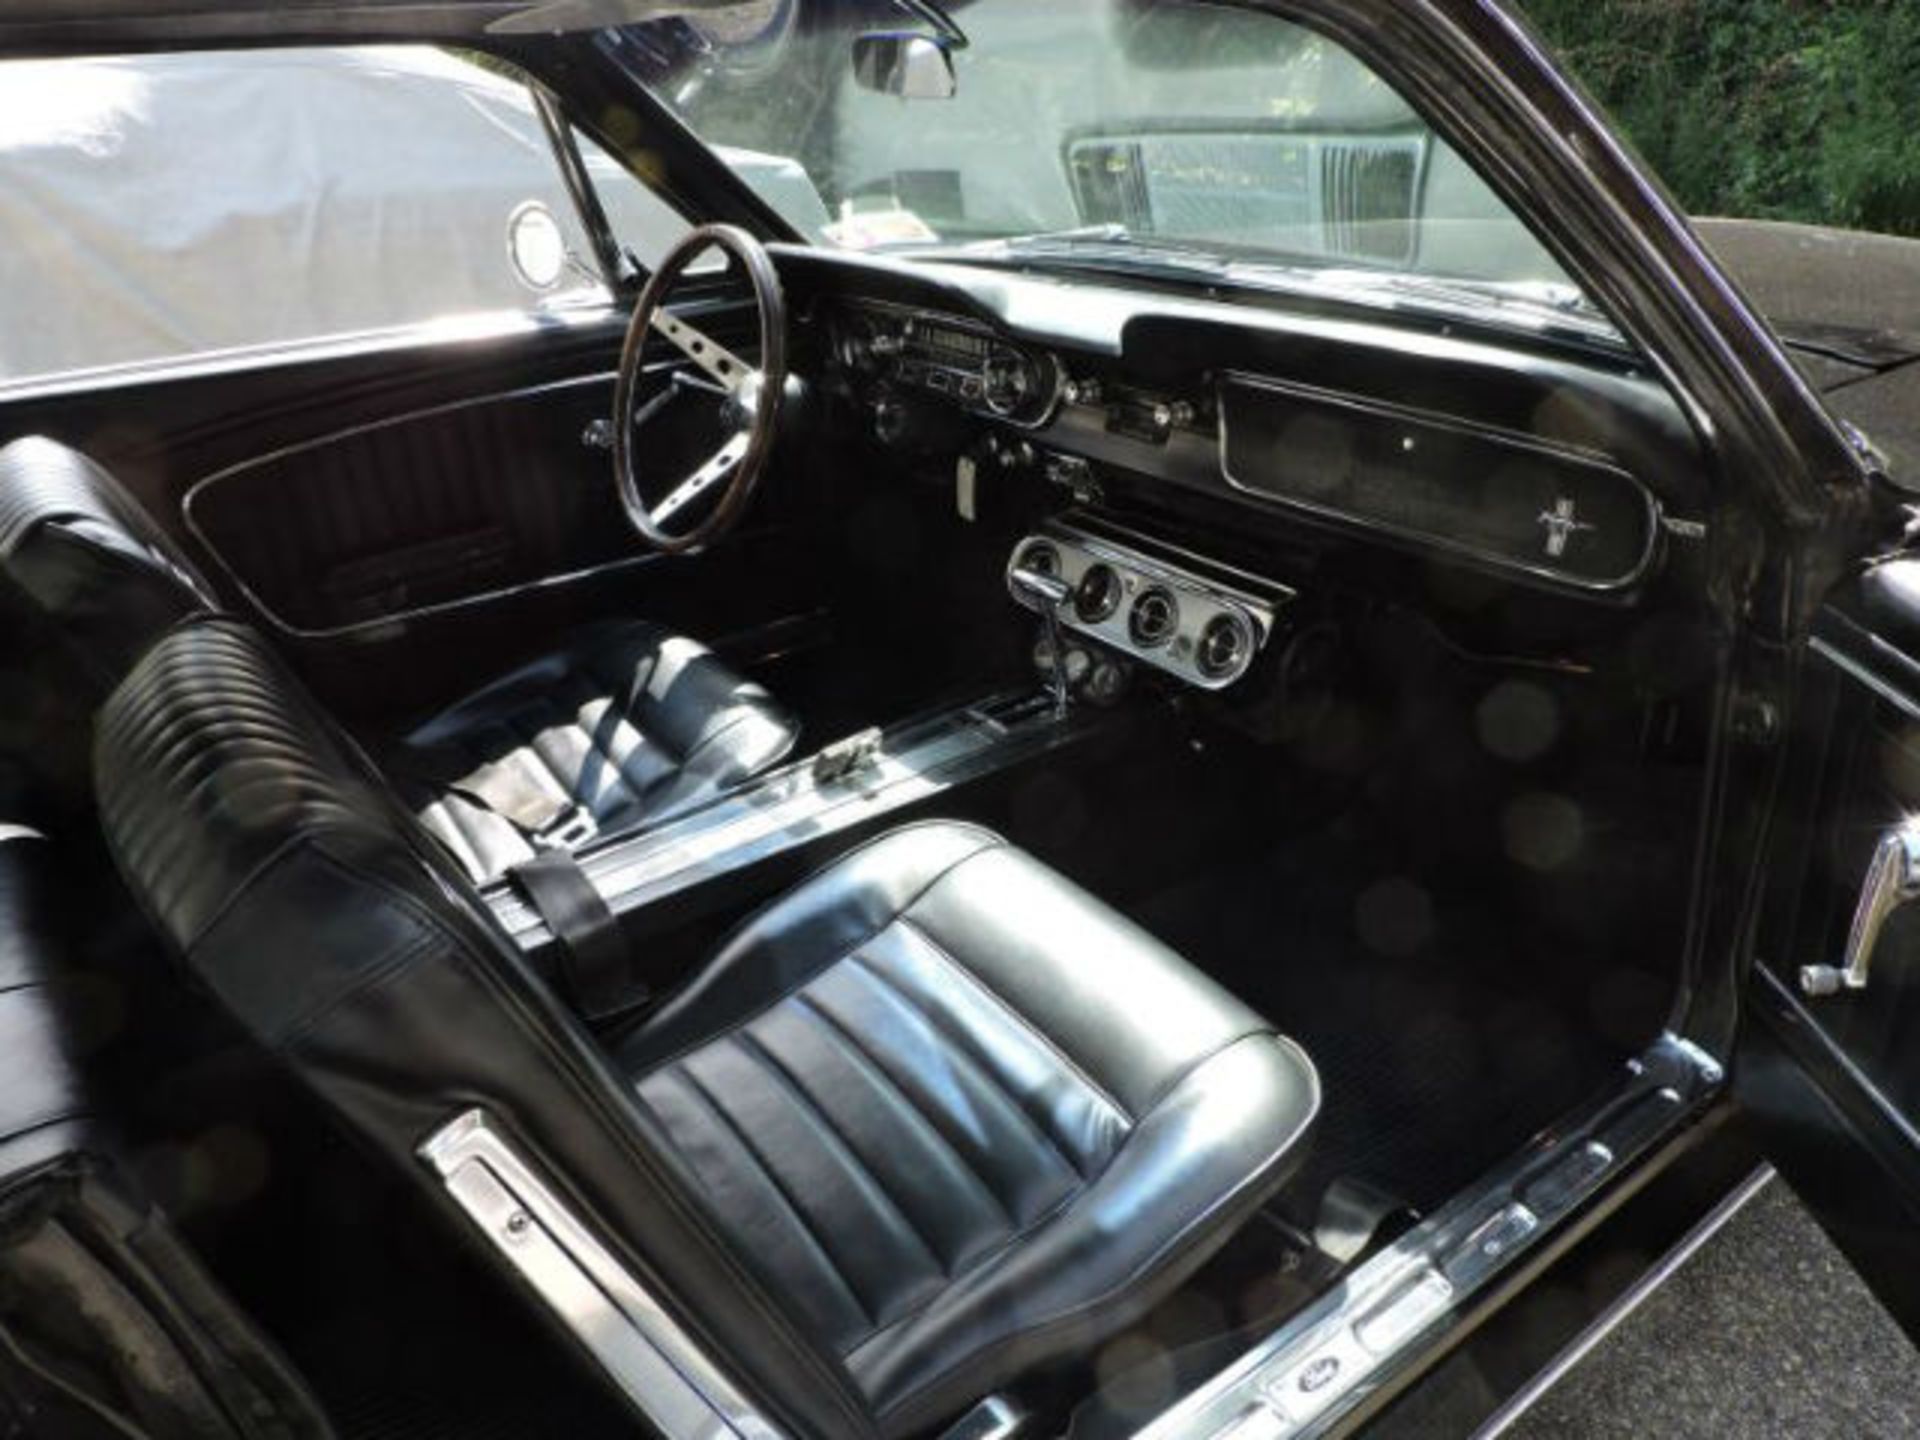 65' Ford Mustang - Year 1965, Automatic Transmission, Original Factory A/C, 6 Cylinders, Approx 72, - Image 6 of 8